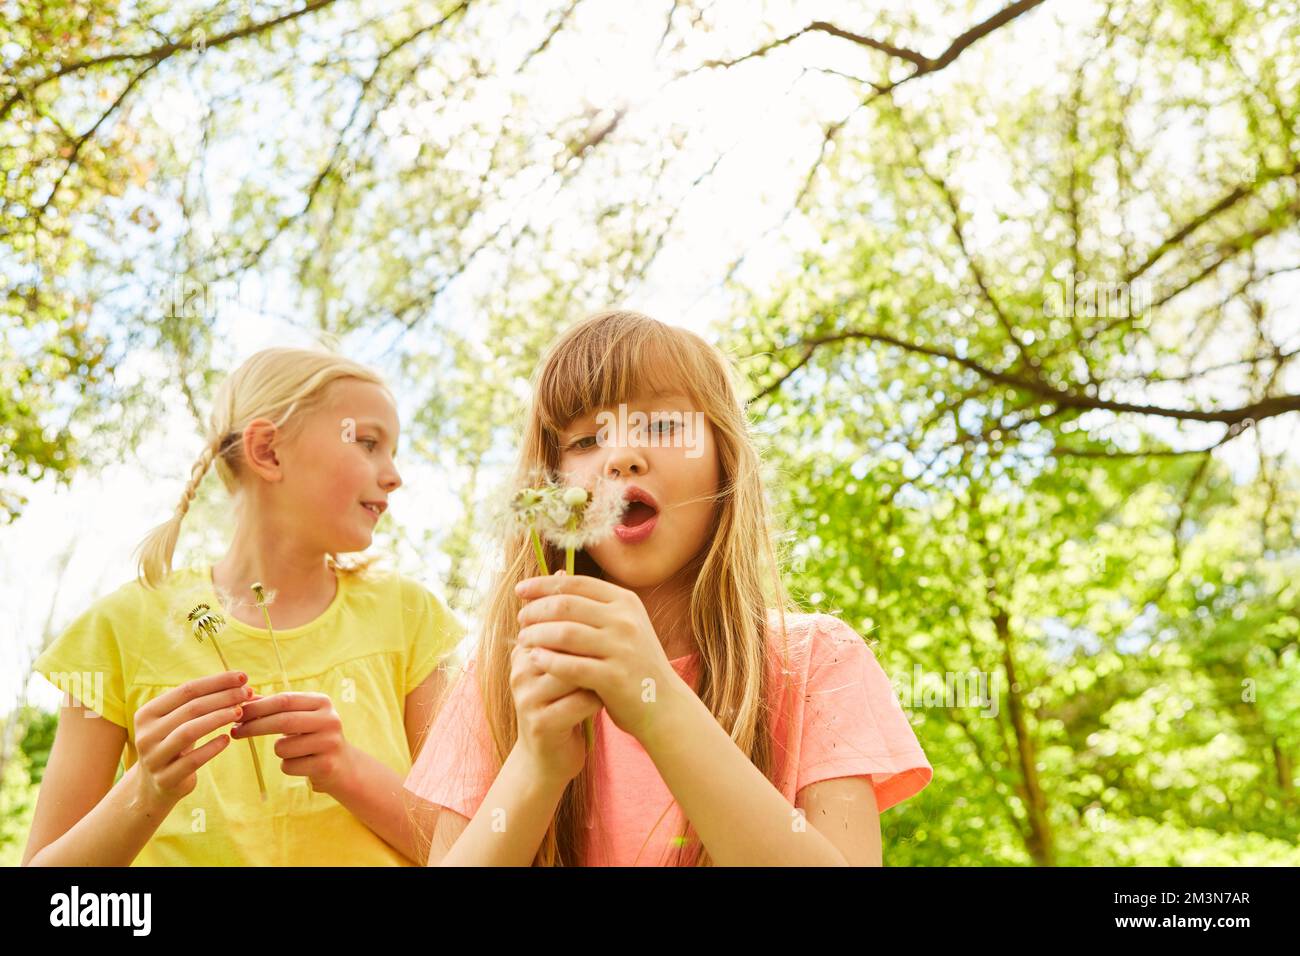 Girl blowing dandelions by female friend while standing in garden during vacation Stock Photo